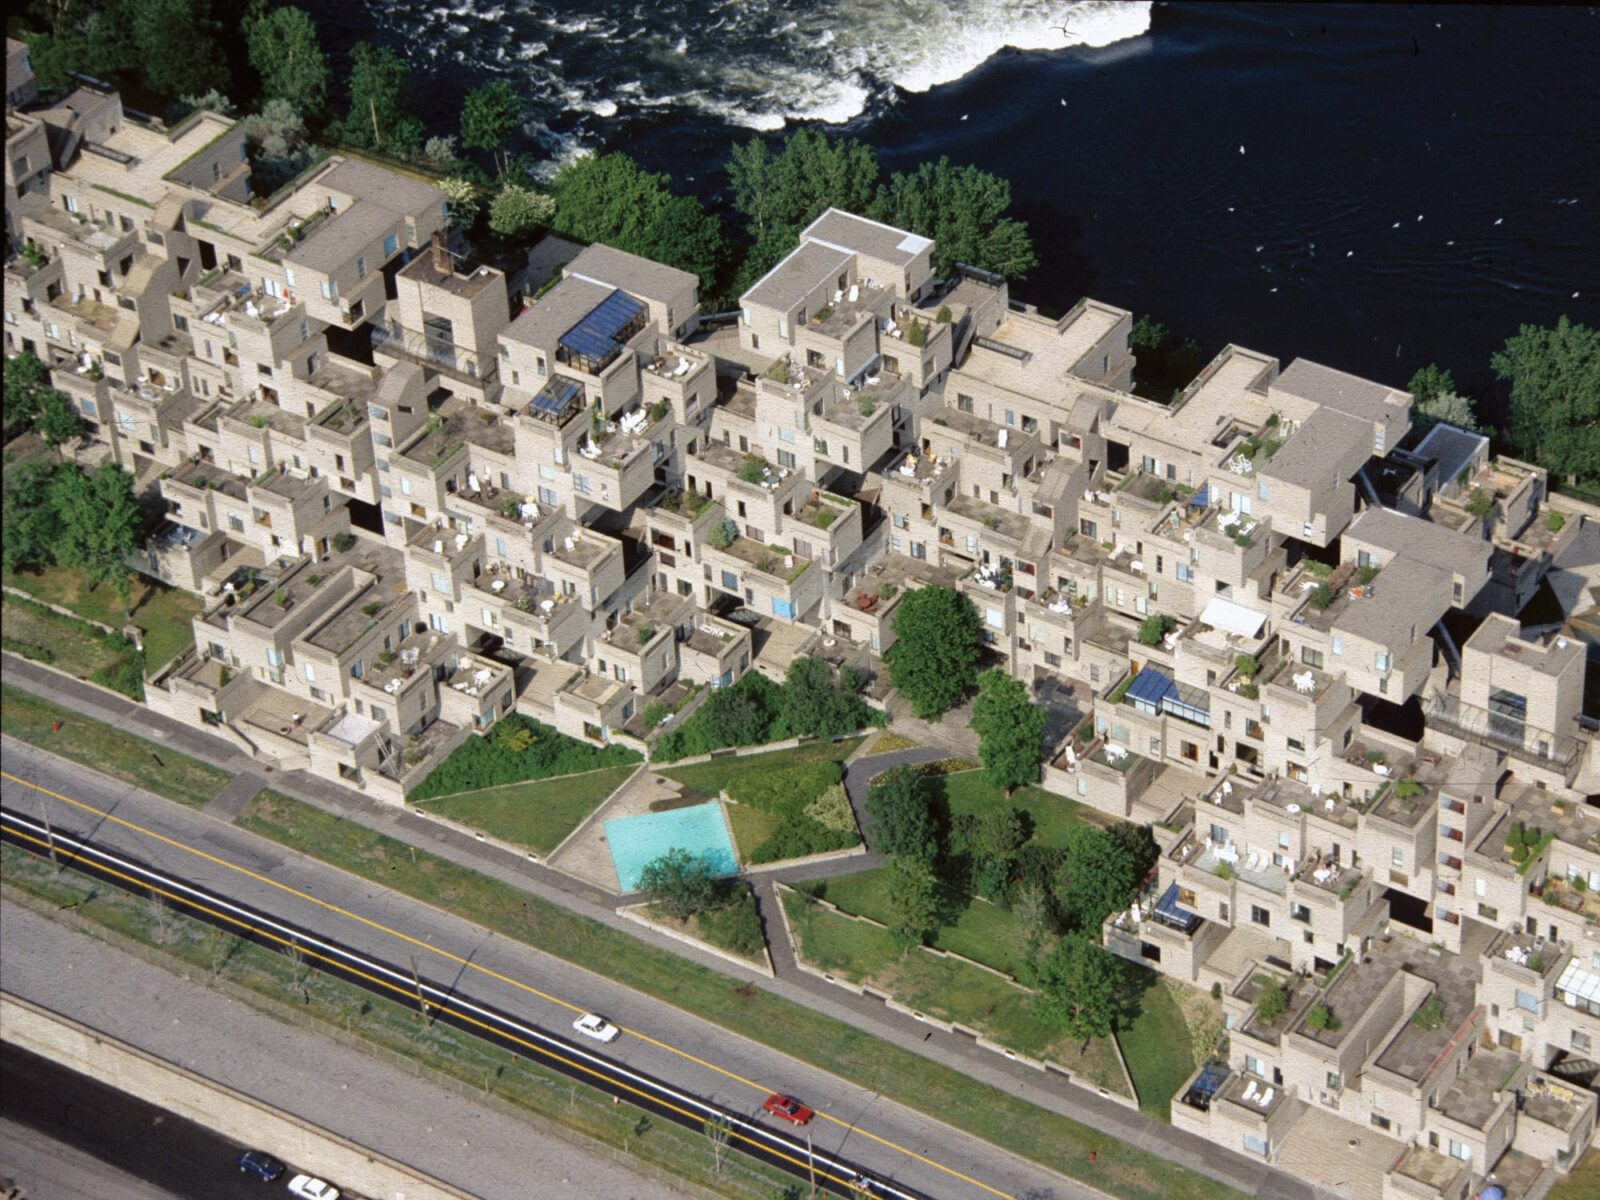 A bird's eye view shows the iconic Habitat 67 building in Montreal.